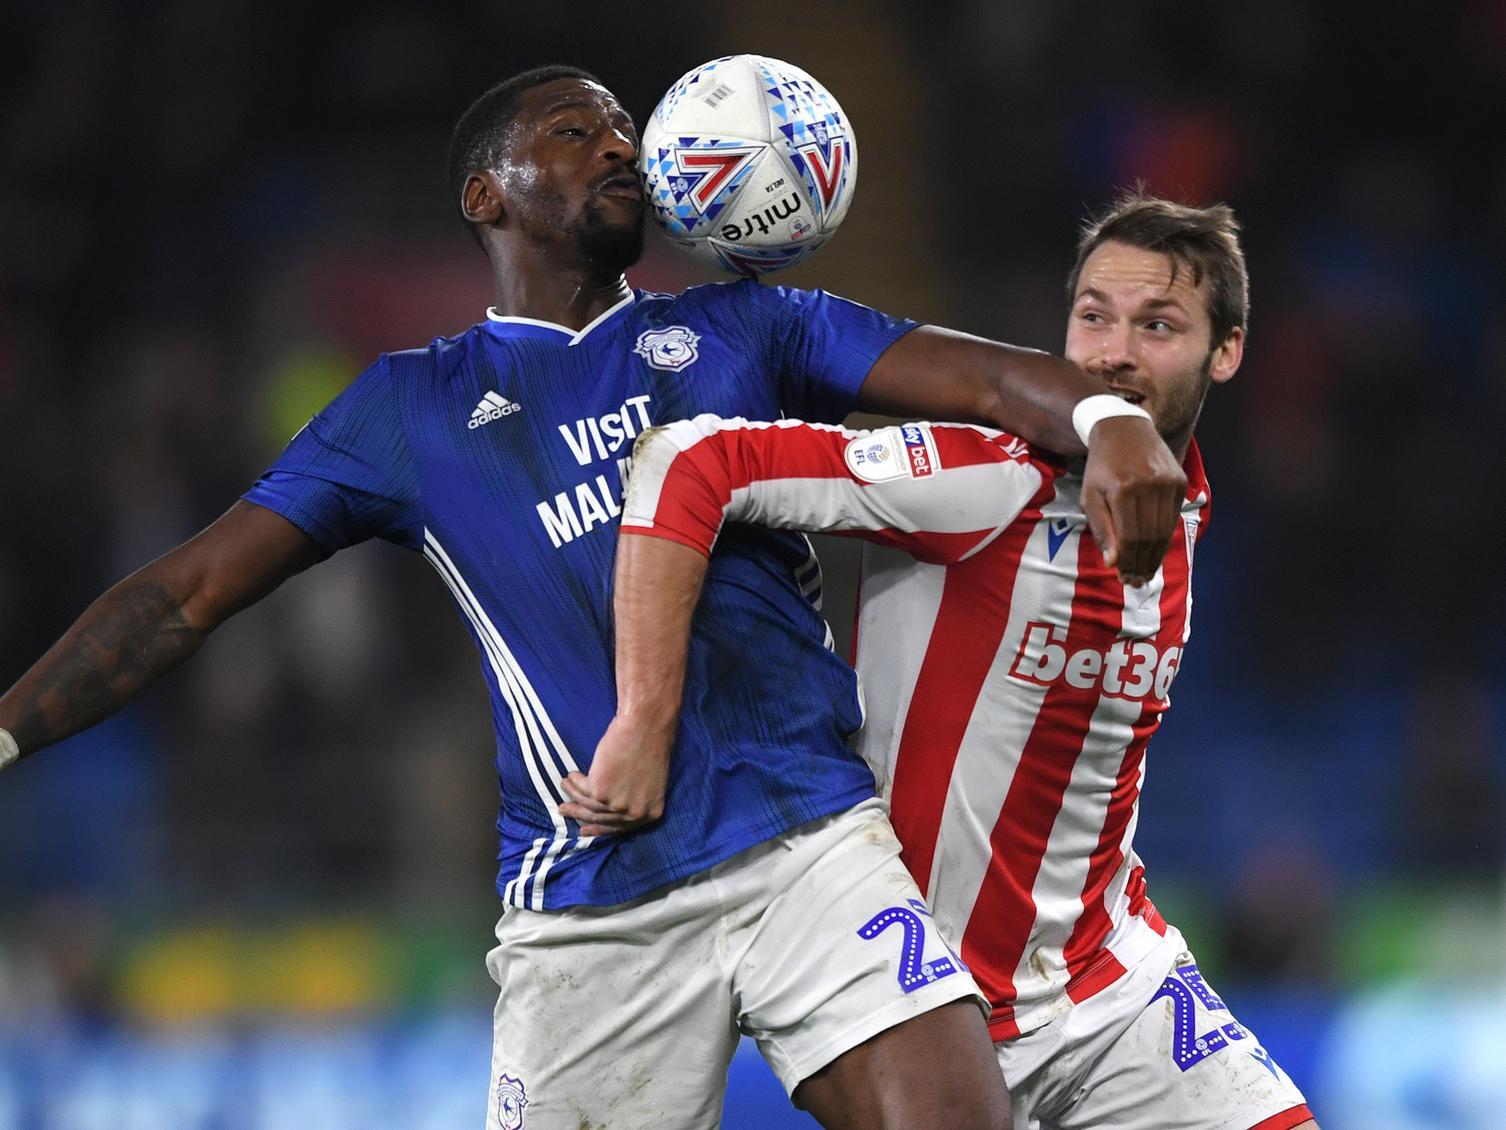 Cardiff City striker Omar Bogle could be offloaded next month - with League One clubs on alert. (The 72)